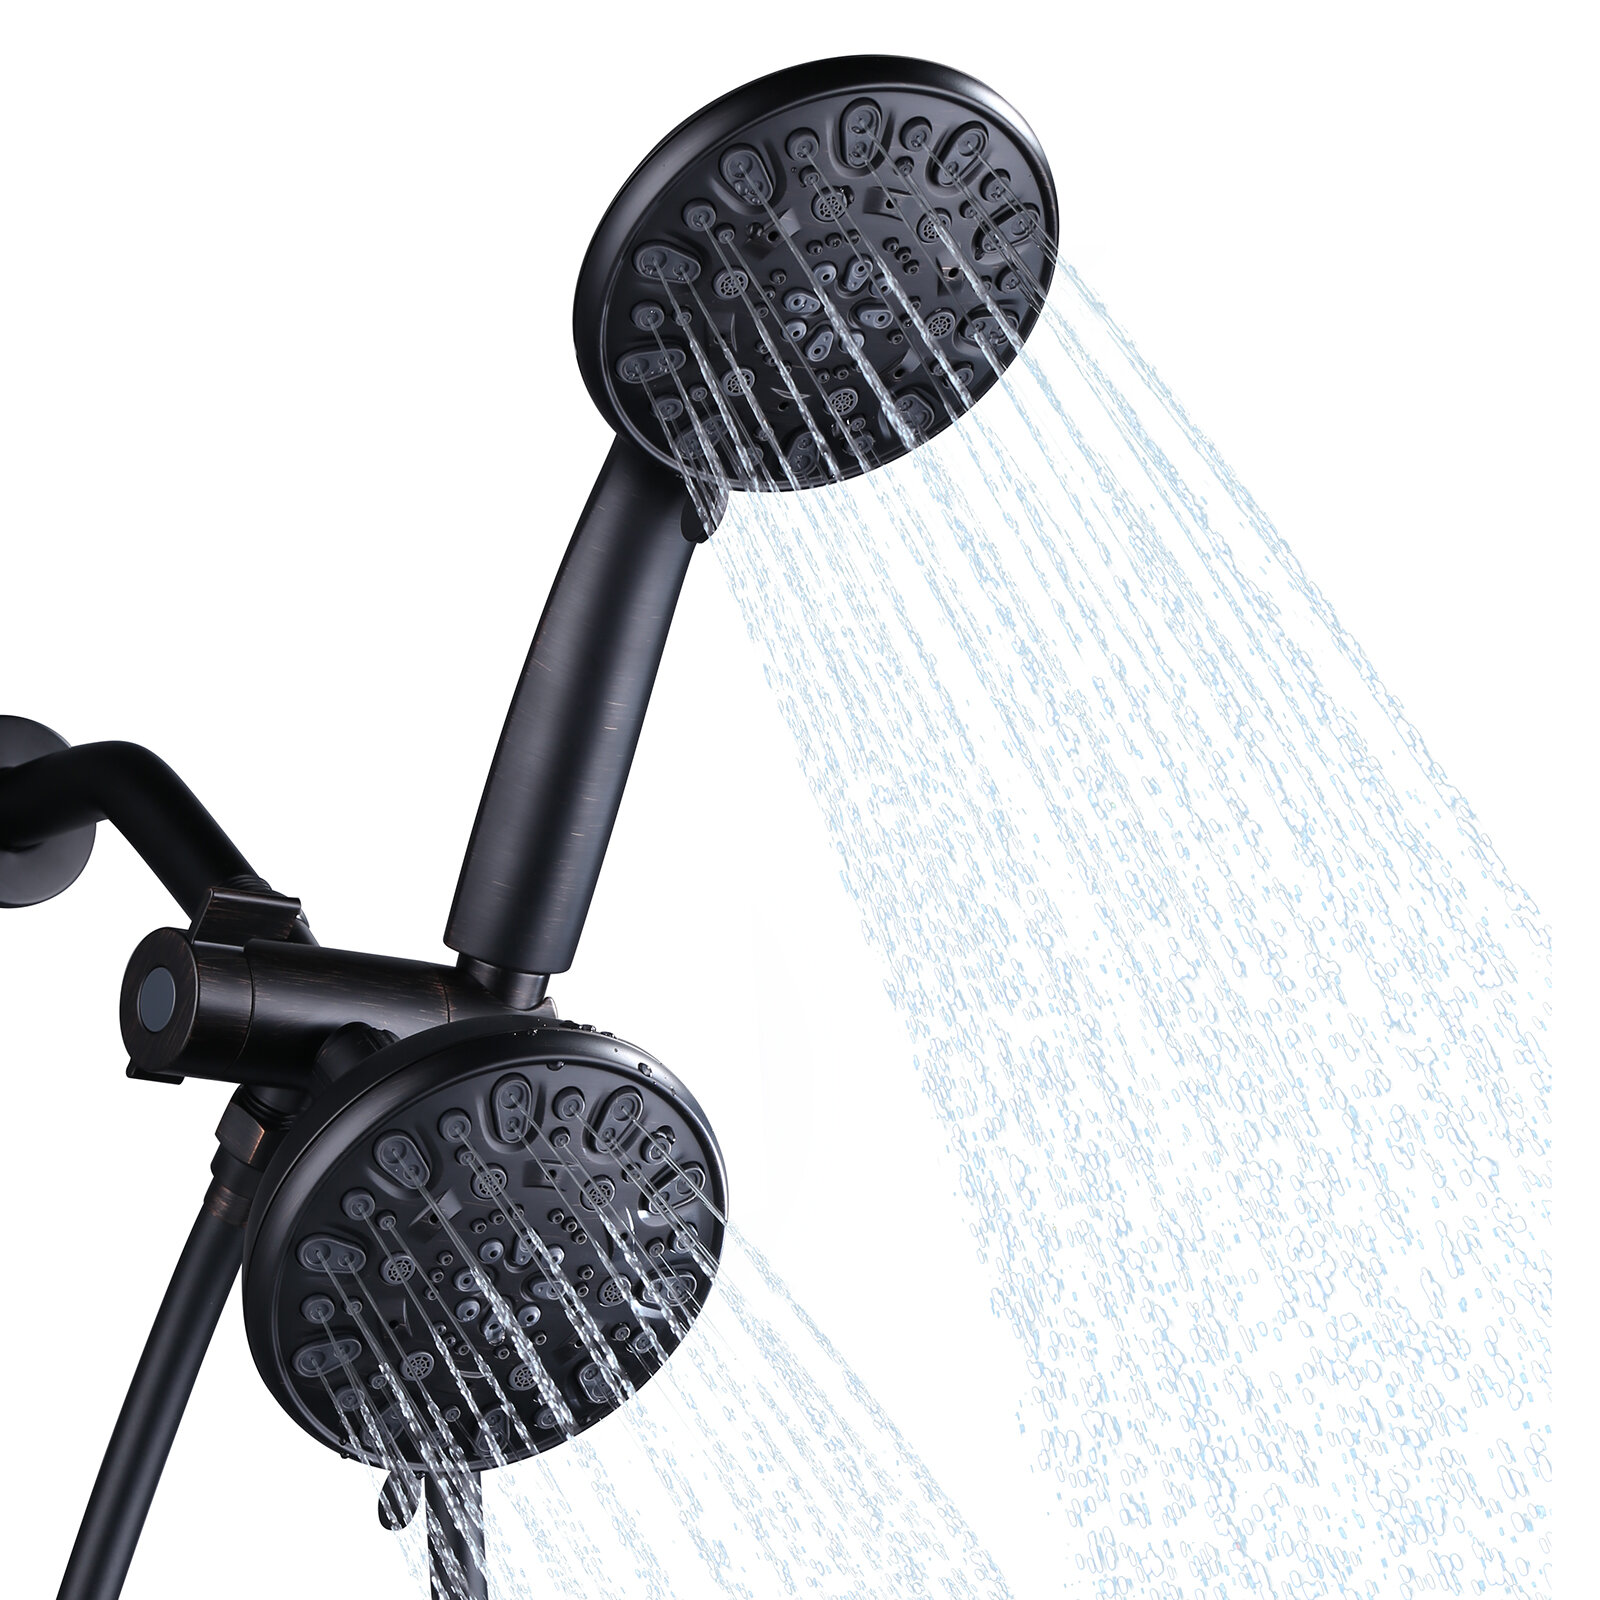 5 High Pressure Handheld Shower Head 6-setting - High Flow Even With Low  Water Pressure - Hand Held Showerhead Set With 59 Stainless Steel Hose,  Teflo